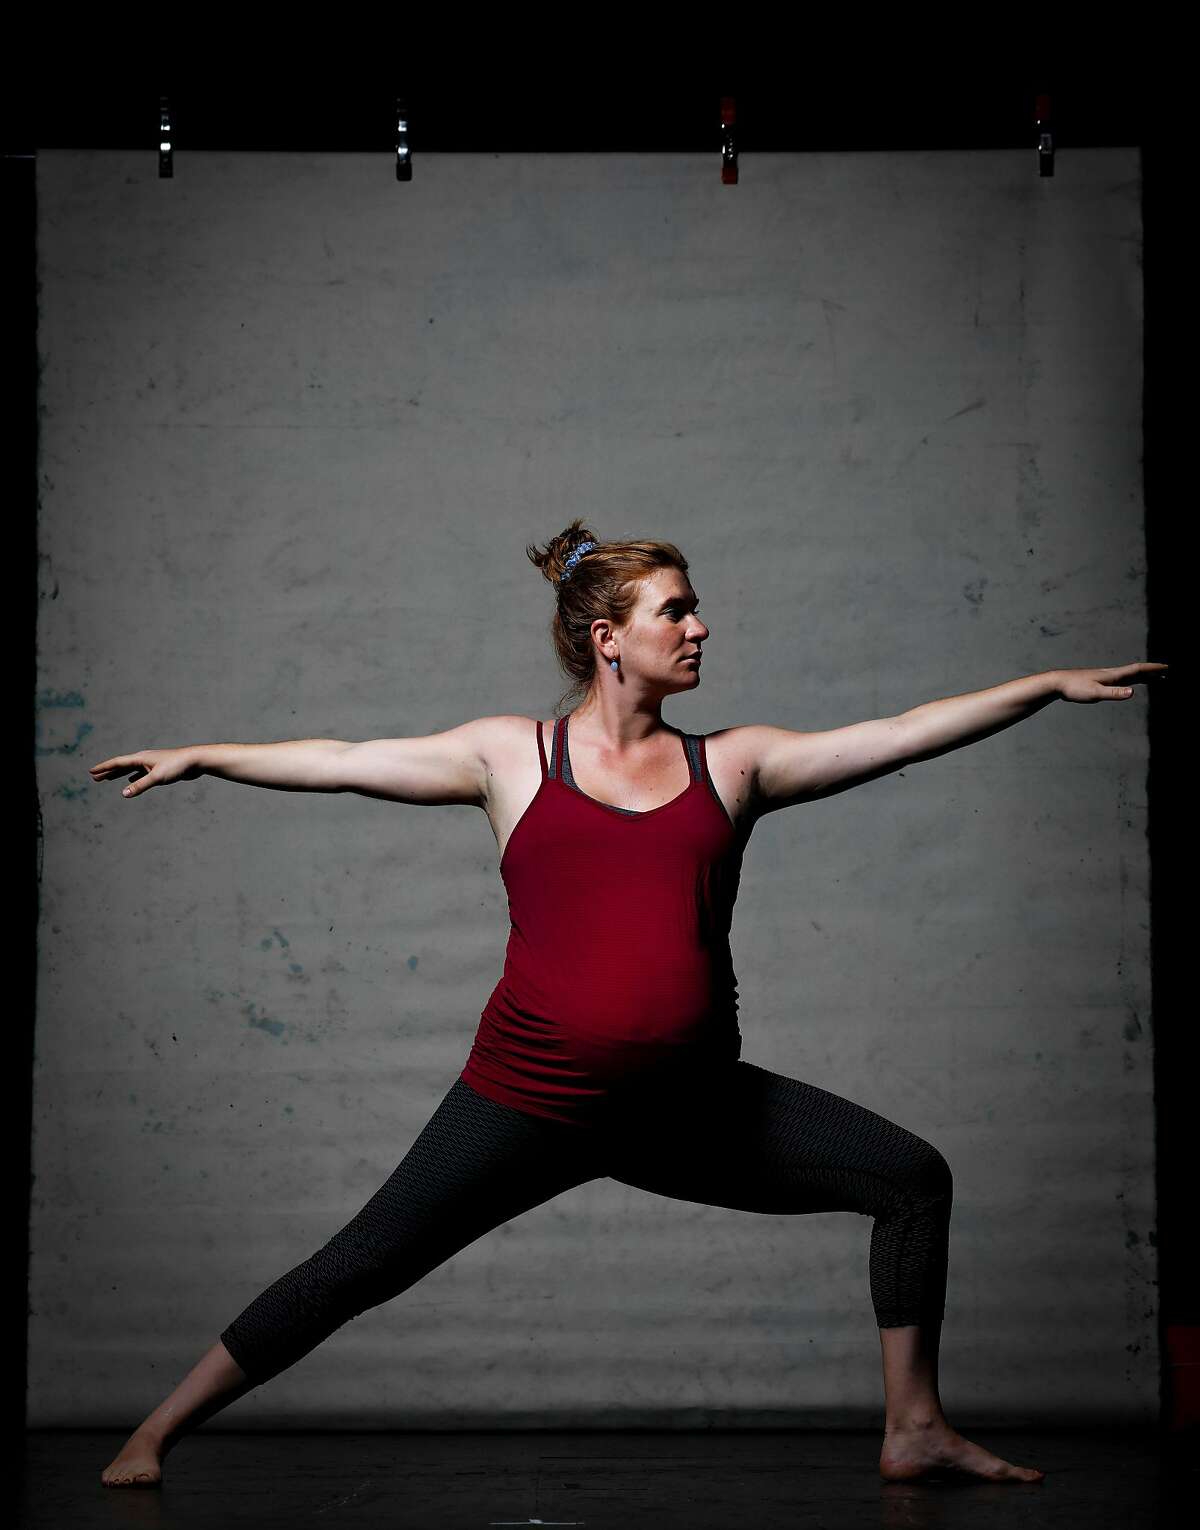 Charlotte Bruce-Byrne, who has been practicing yoga at Yoga Tree with Jane Austin, strikes the extended side angle pose on Thursday, Sept. 12, 2019 in San Francisco, Calif.